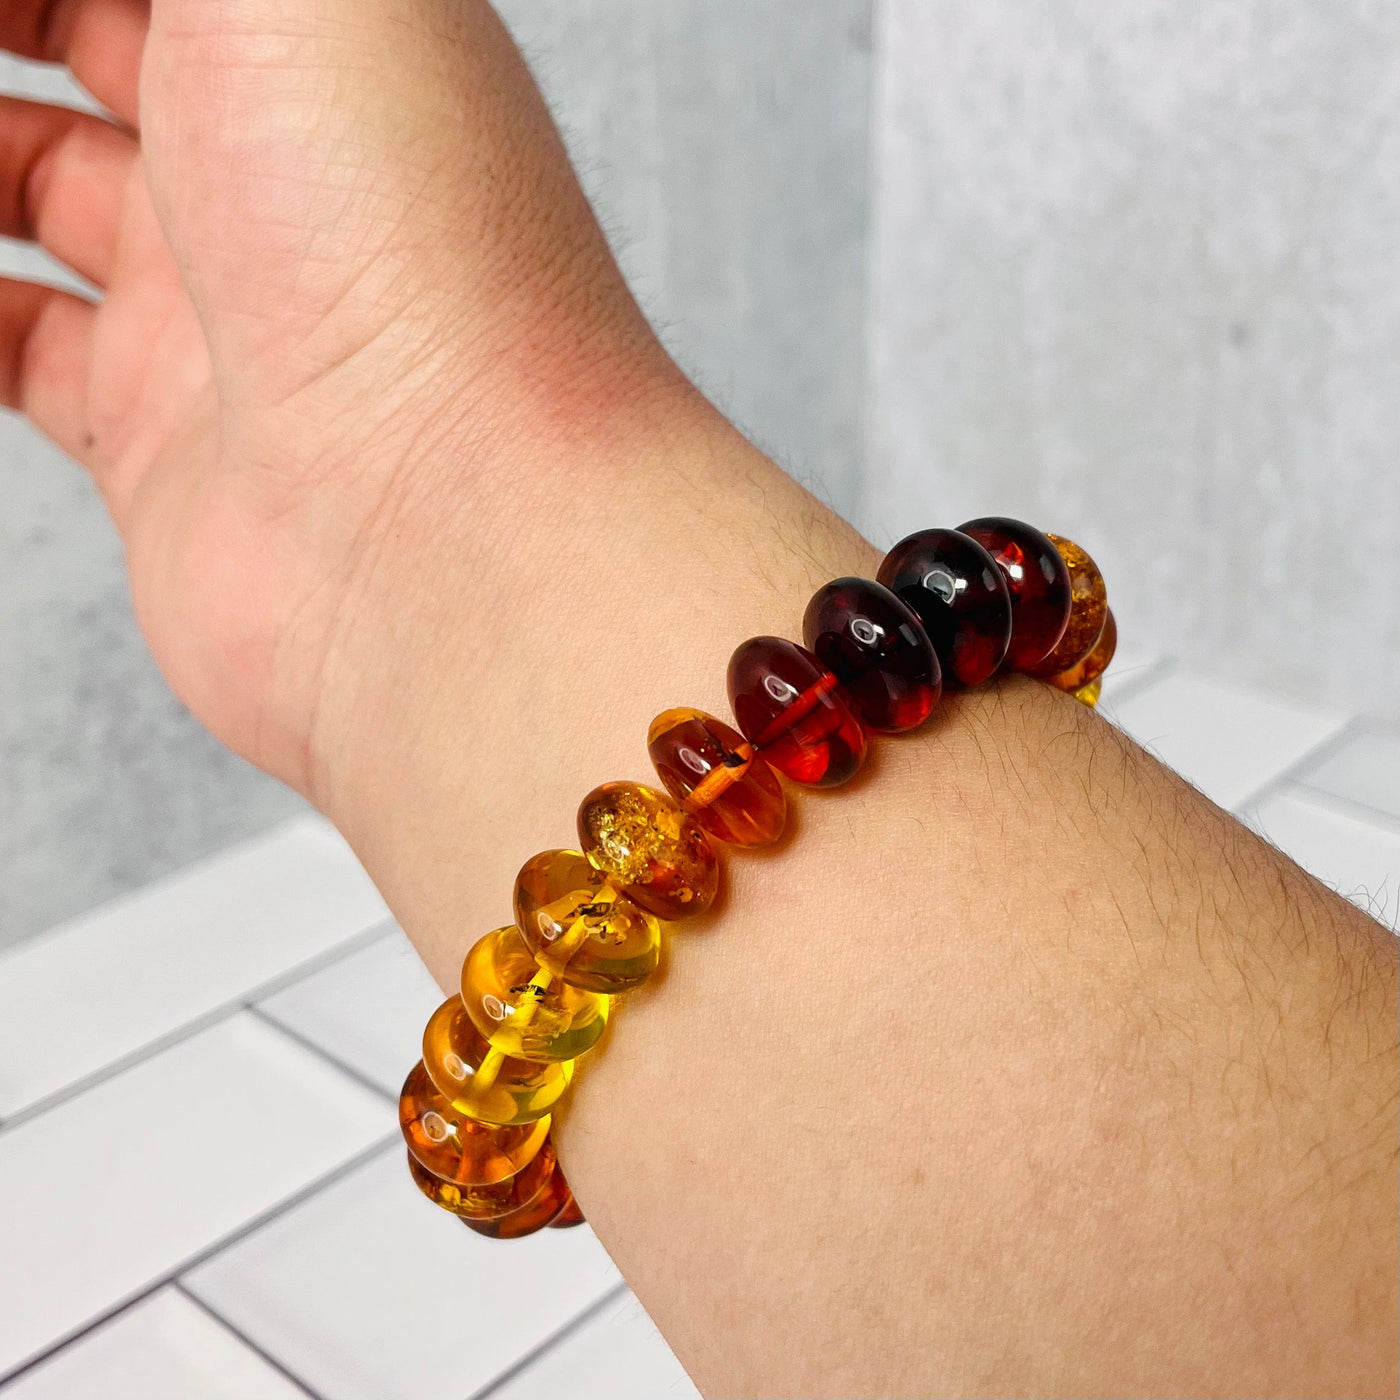 Up close view of Baltic Amber Bracelet on a man's wrist.